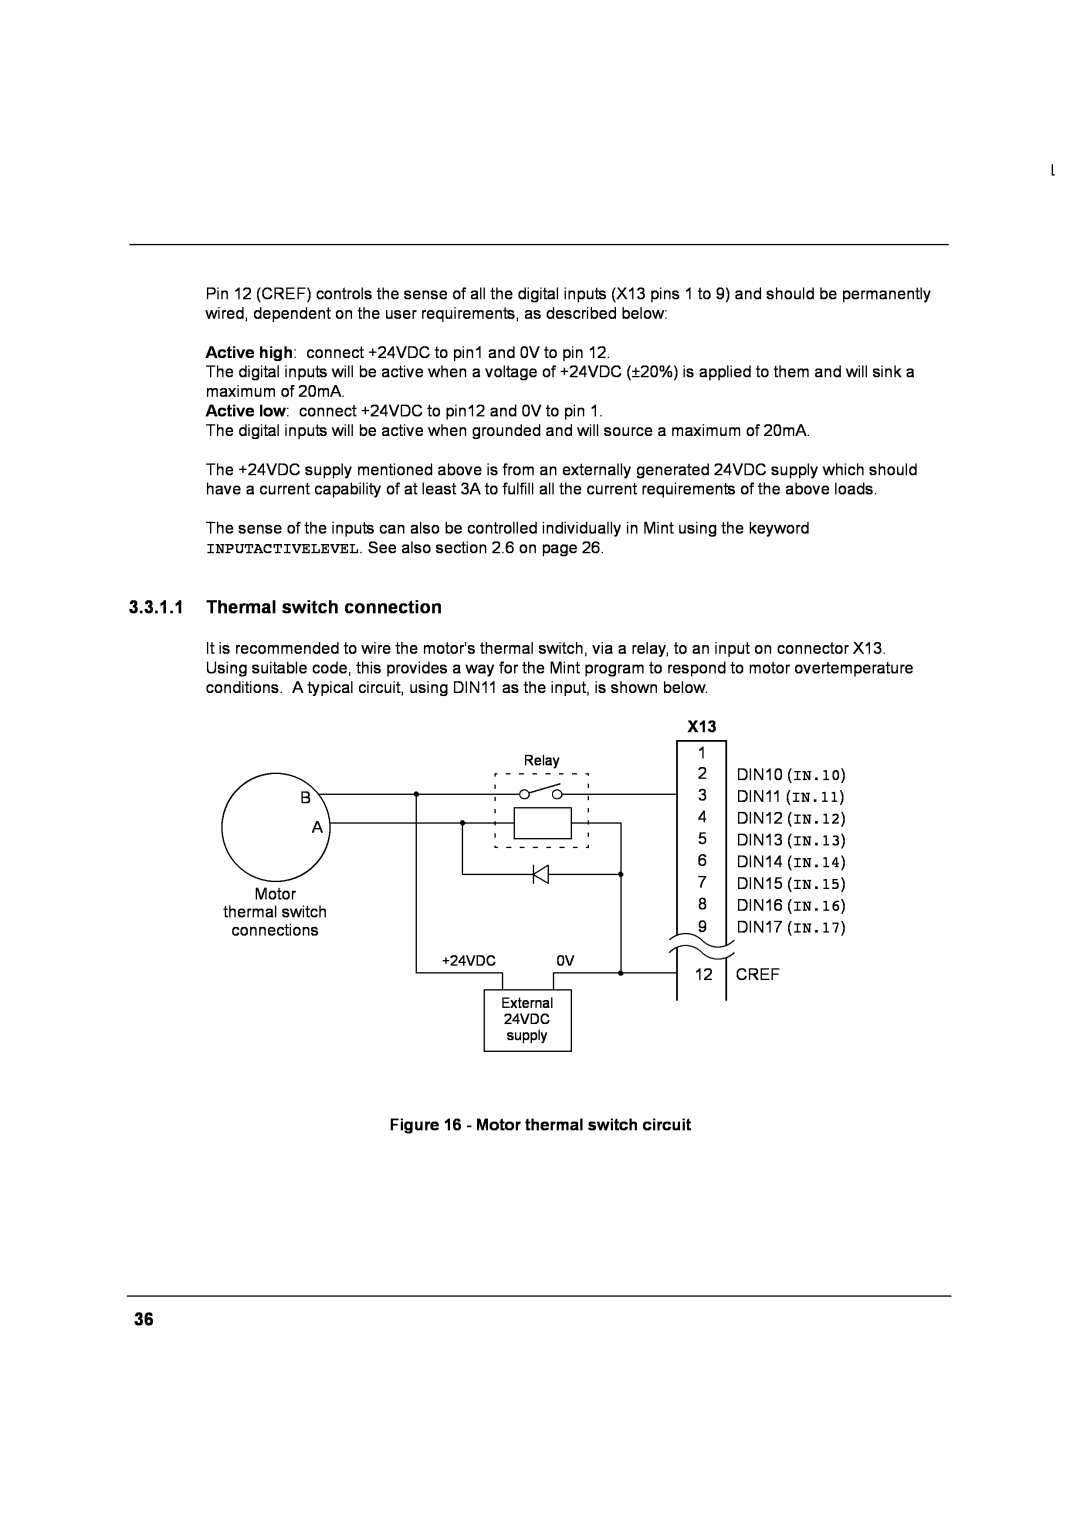 Baldor MN1274 06/2001 installation manual Thermal switch connection, Motor thermal switch circuit 